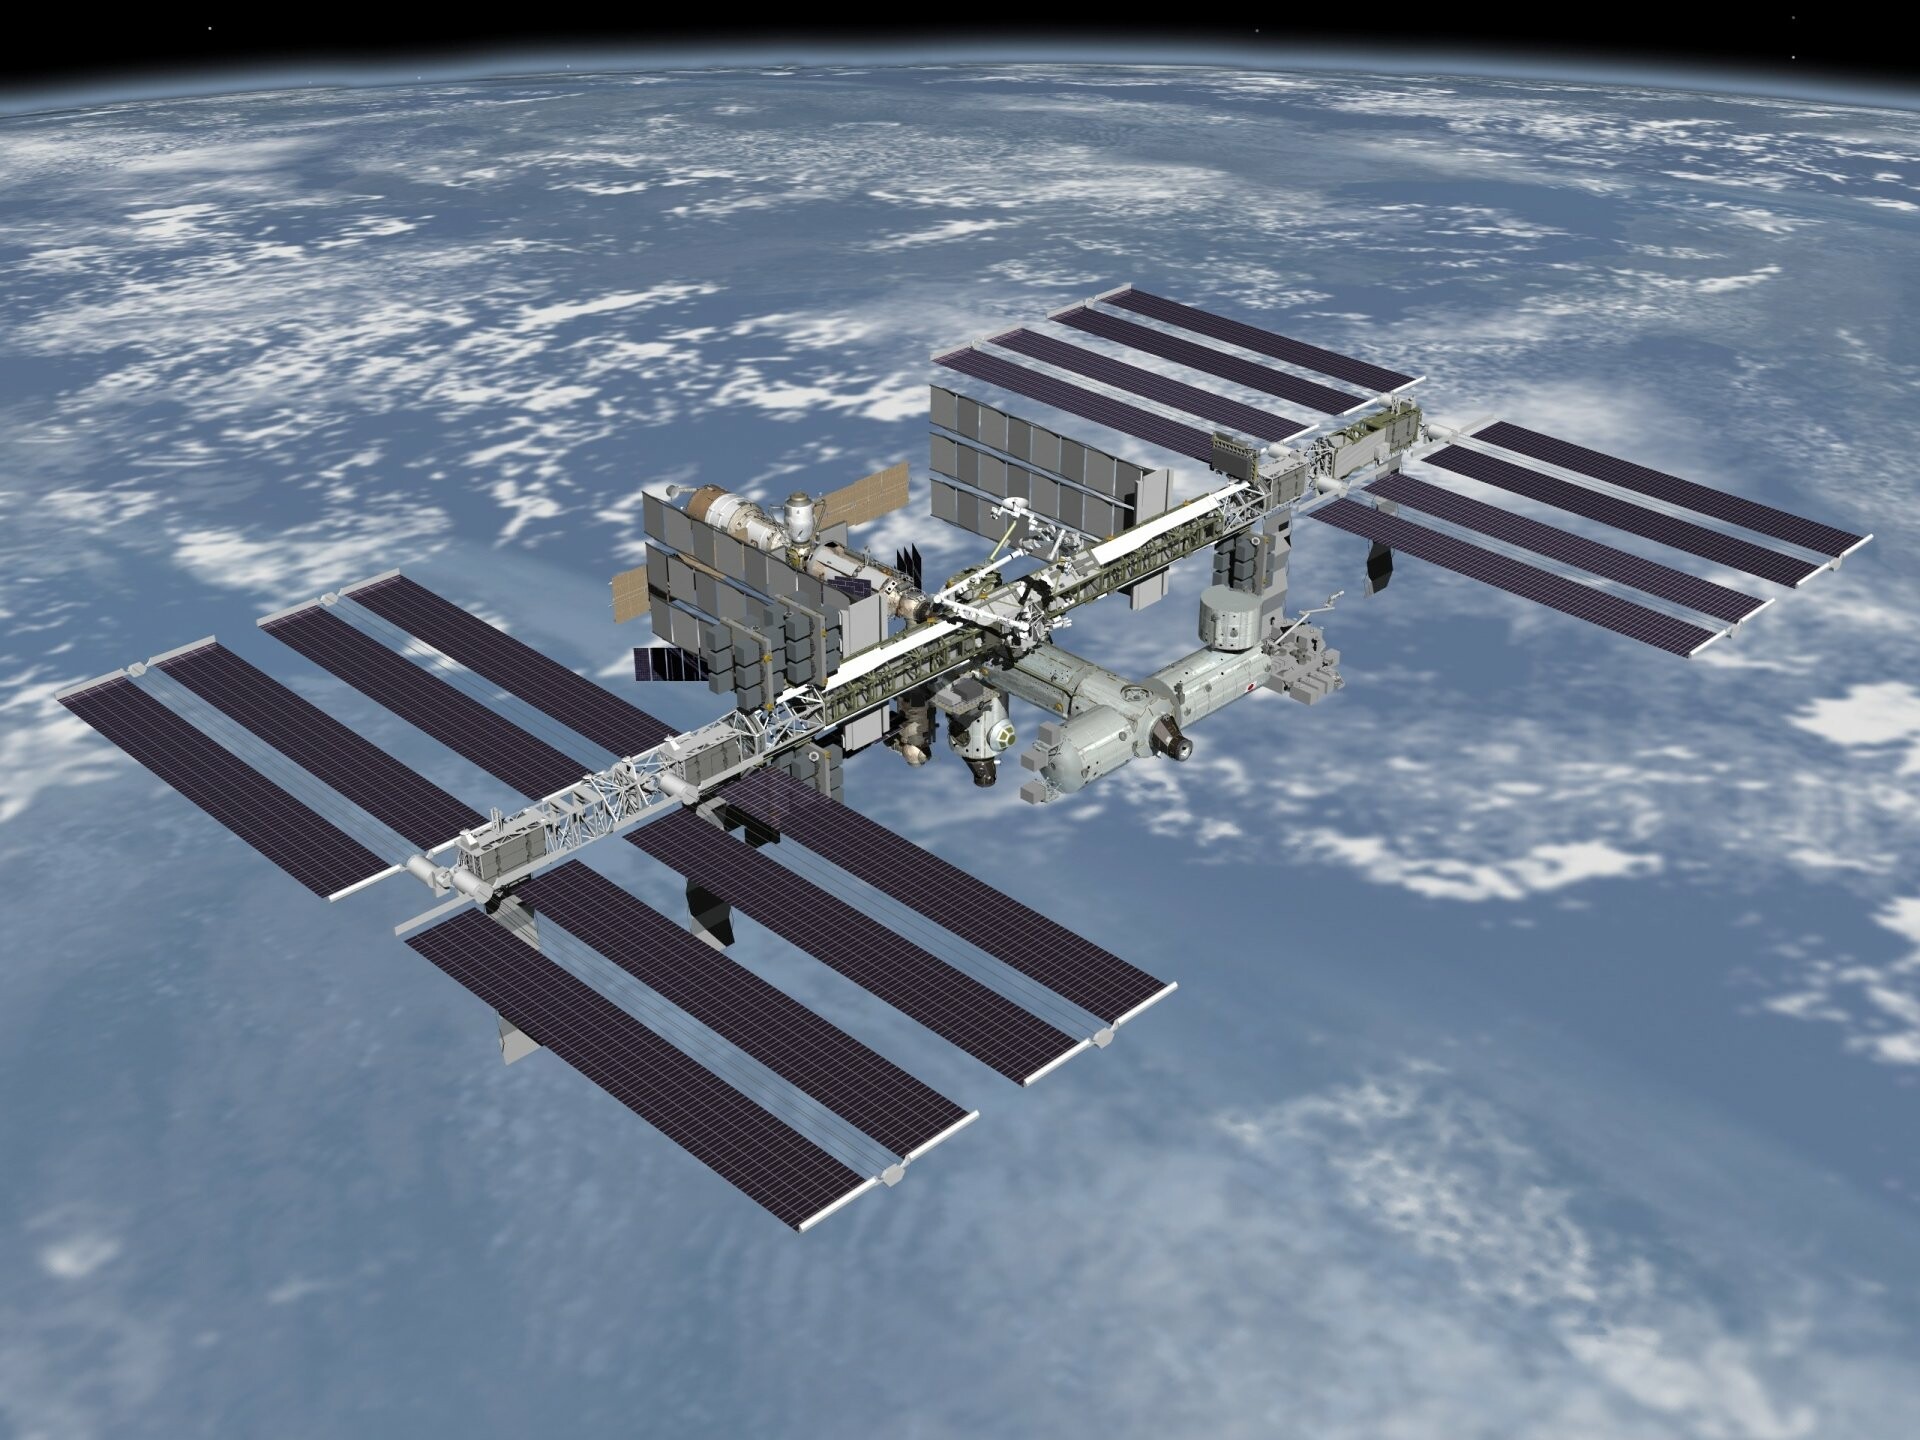 ISS: International Space Station, Consists of pressurized habitation modules. 1920x1440 HD Background.